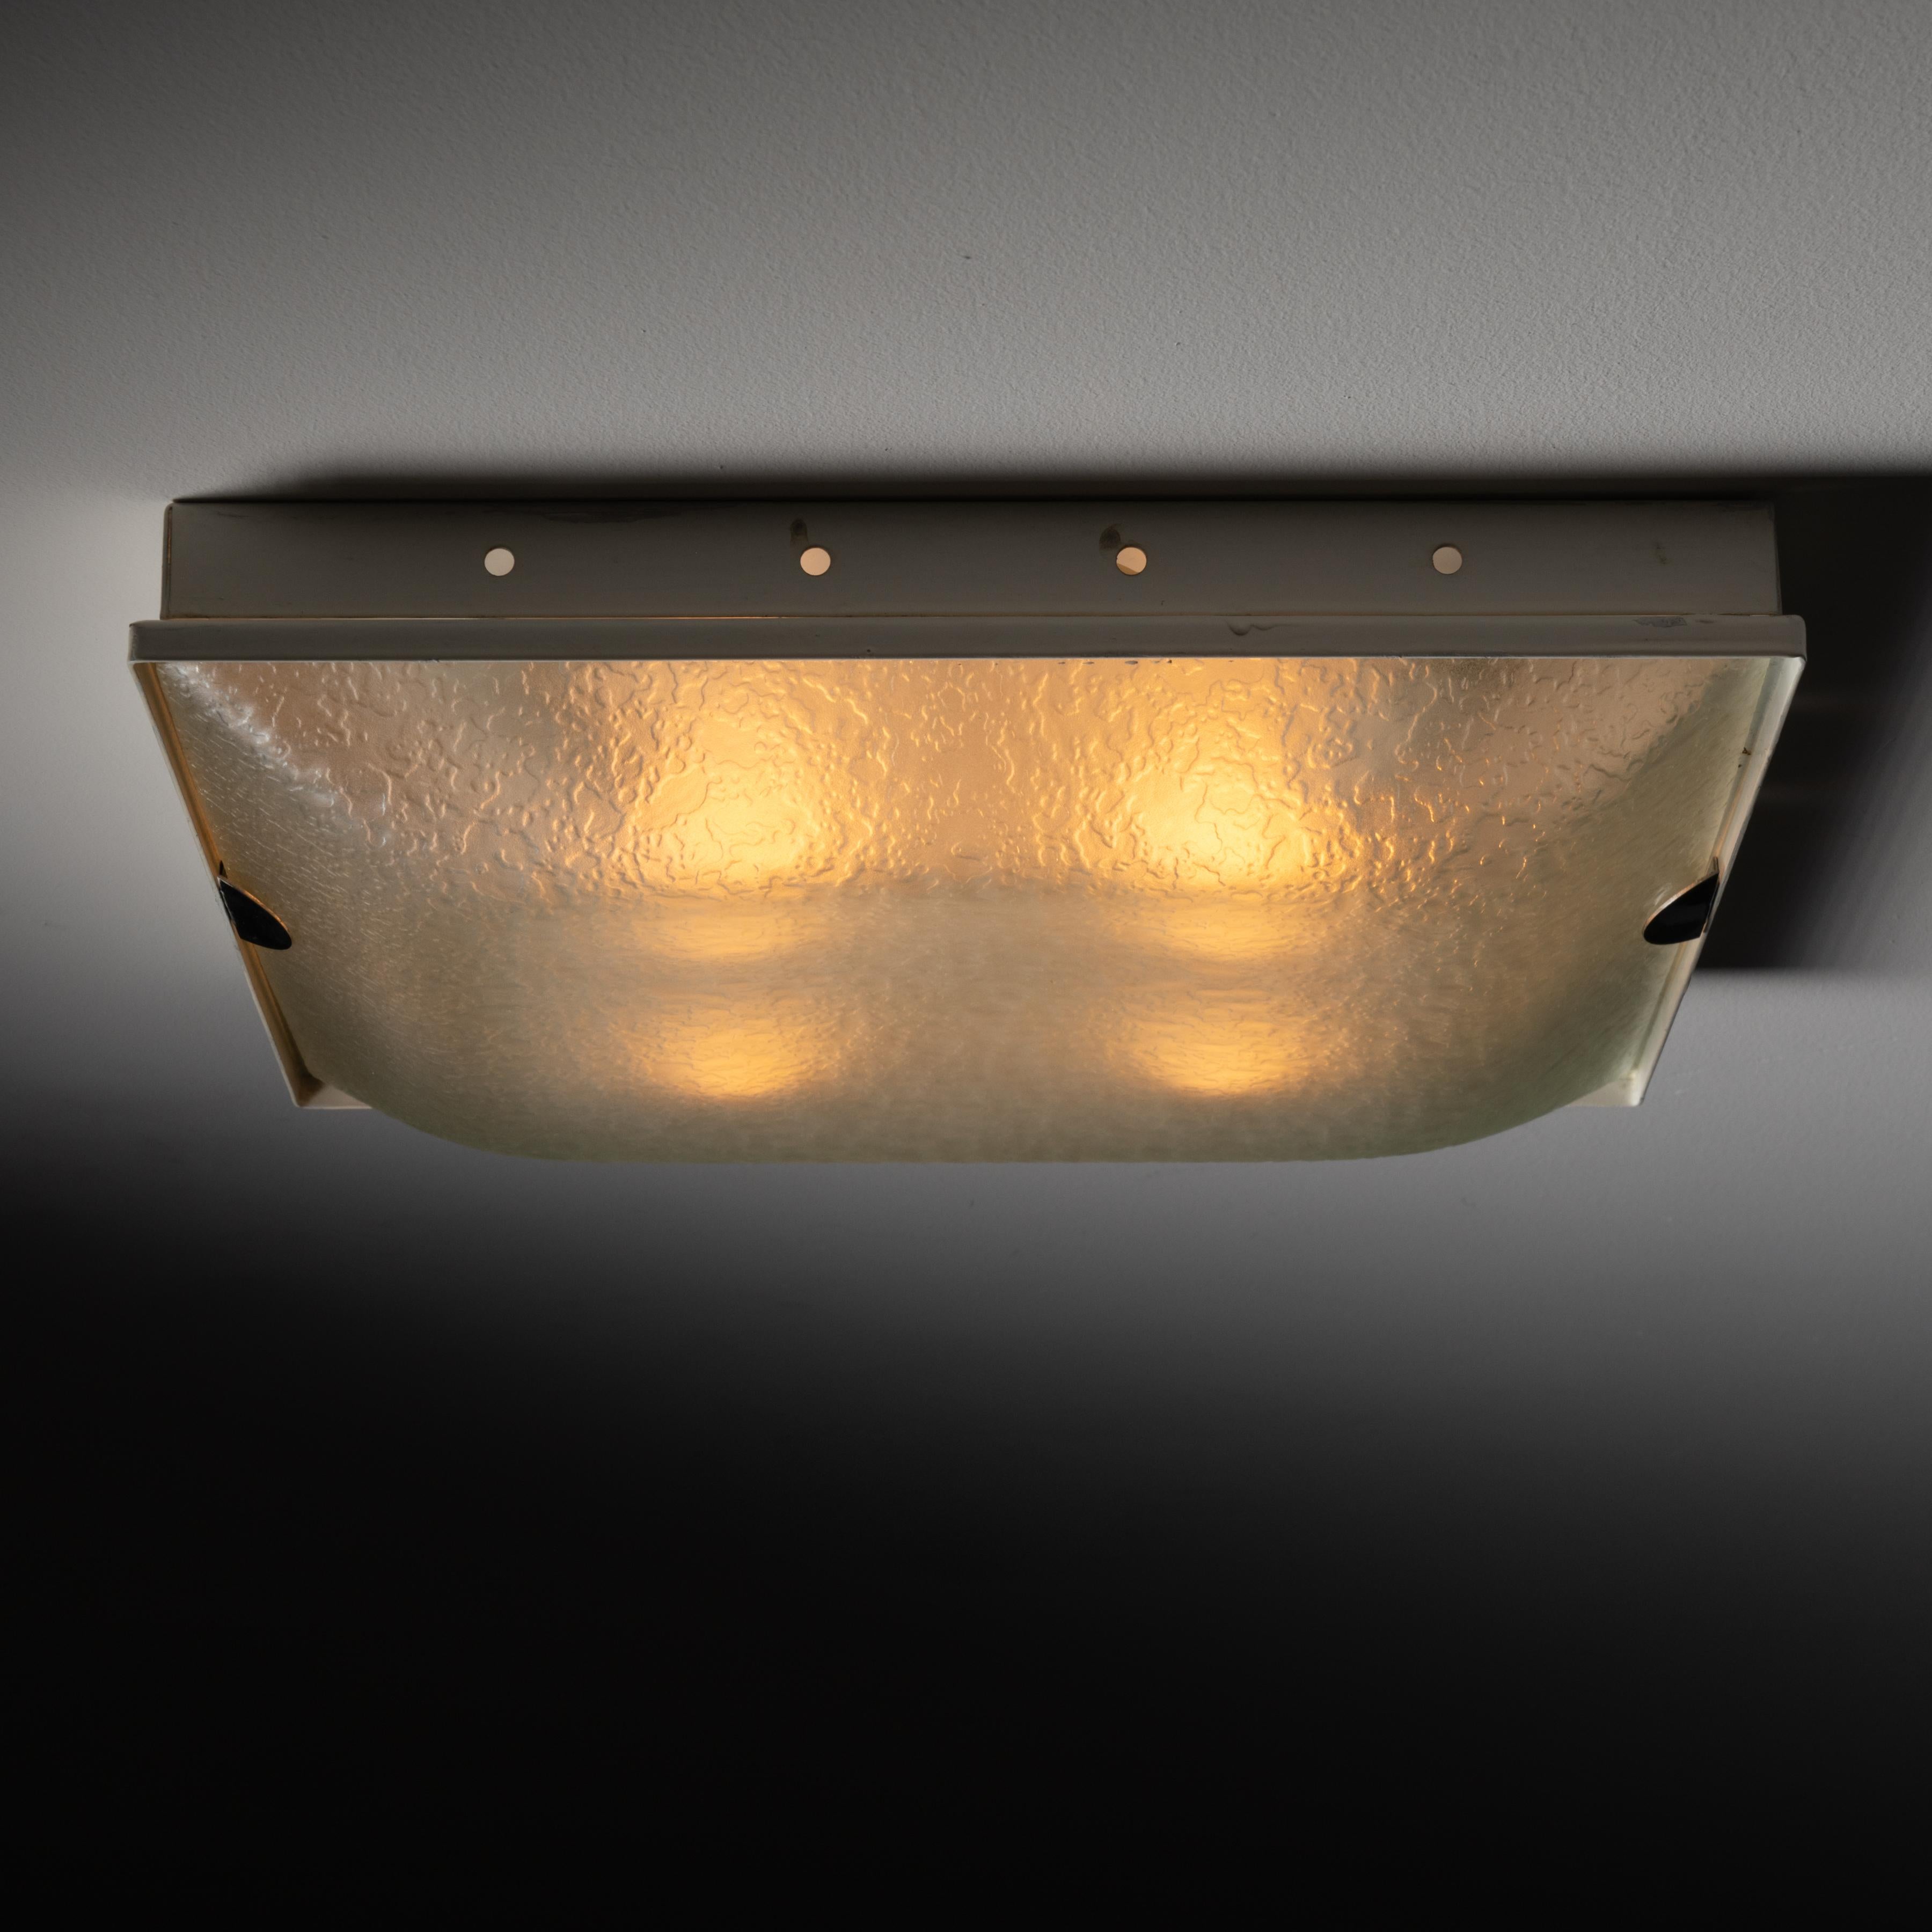 Model 1940 wall or ceiling light by Max Ingrand for Fontana Arte. Designed and manufactured in Italy, circa 1960. Simple square-shaped flush mount with textured glass shade and enameled brass frame. This flush mount holds four E14 sockets, adapted